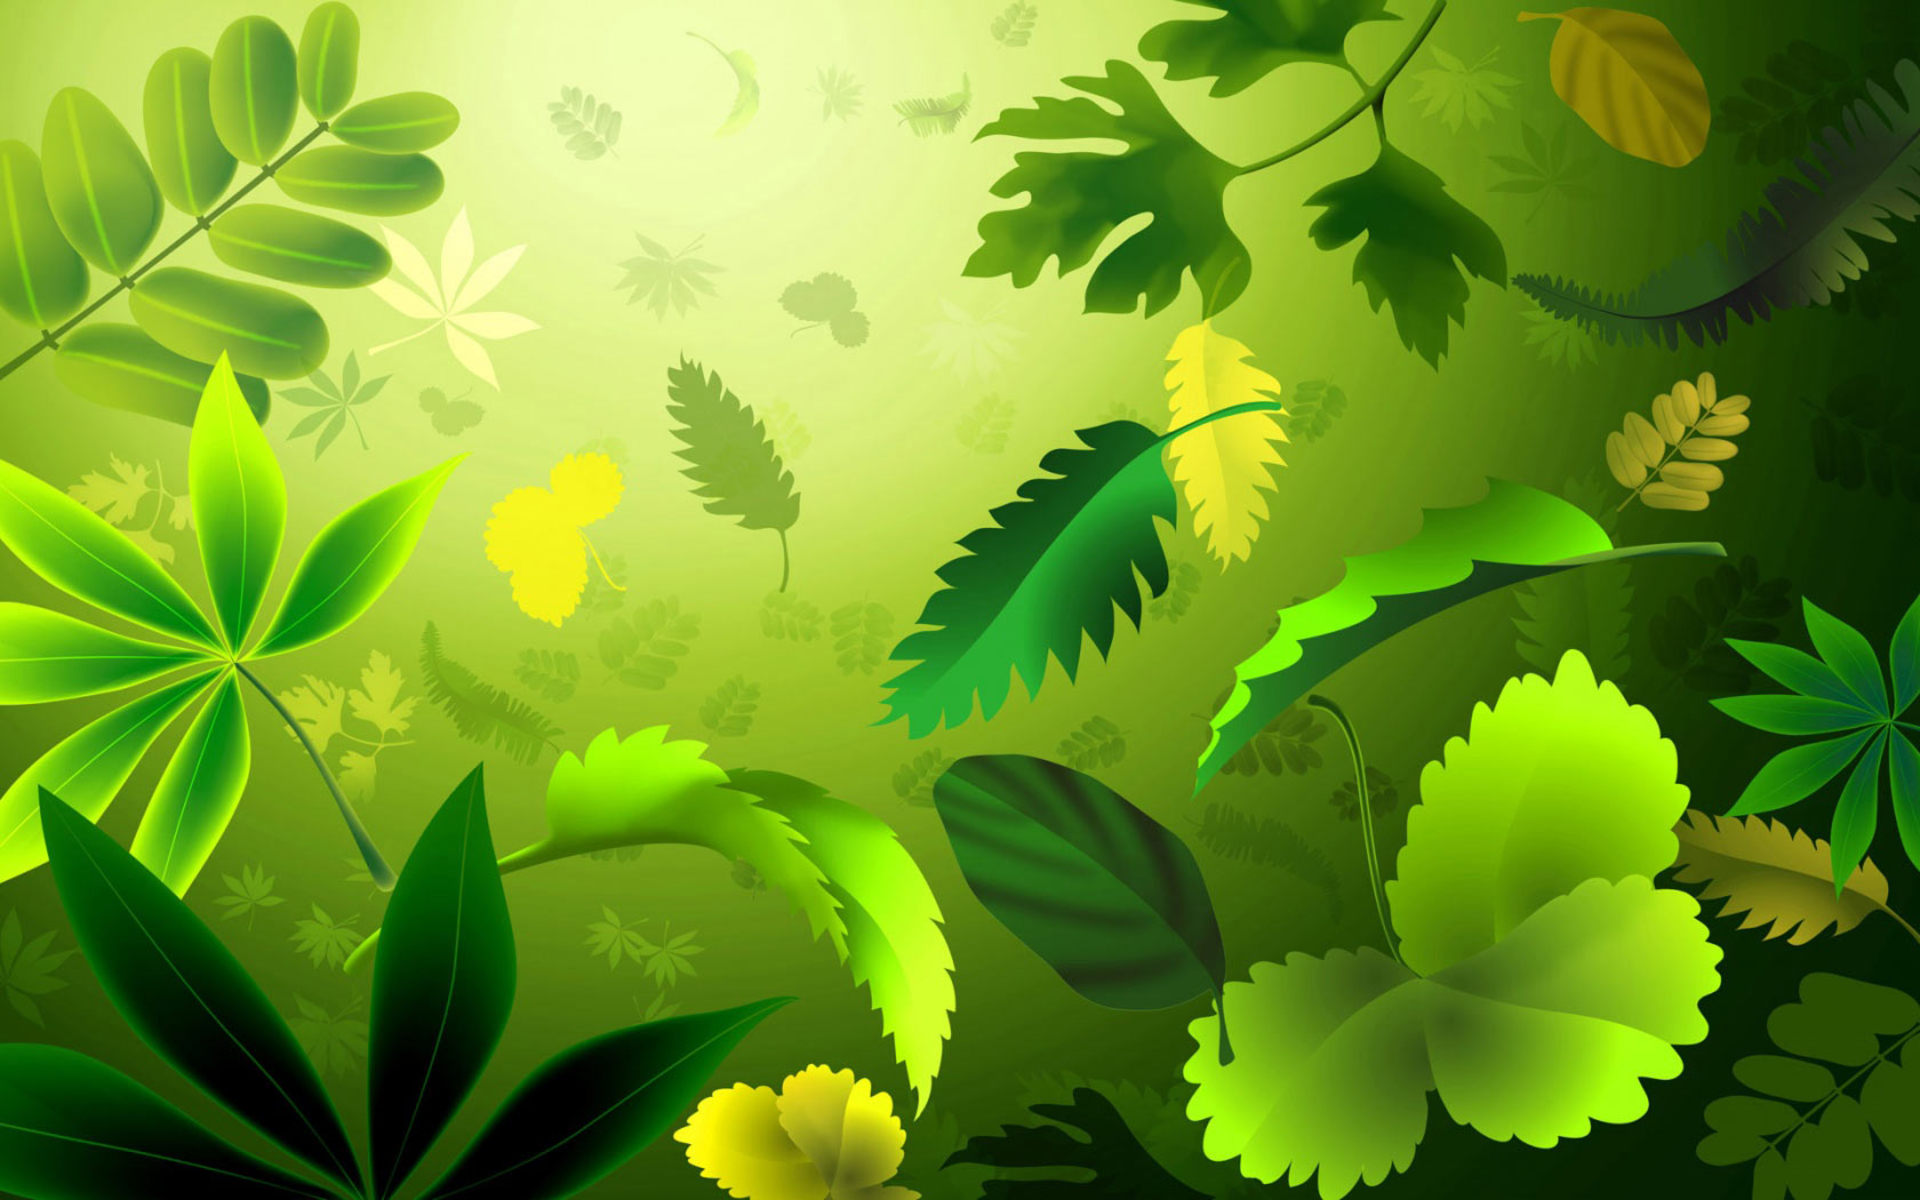 Background clipart forest.